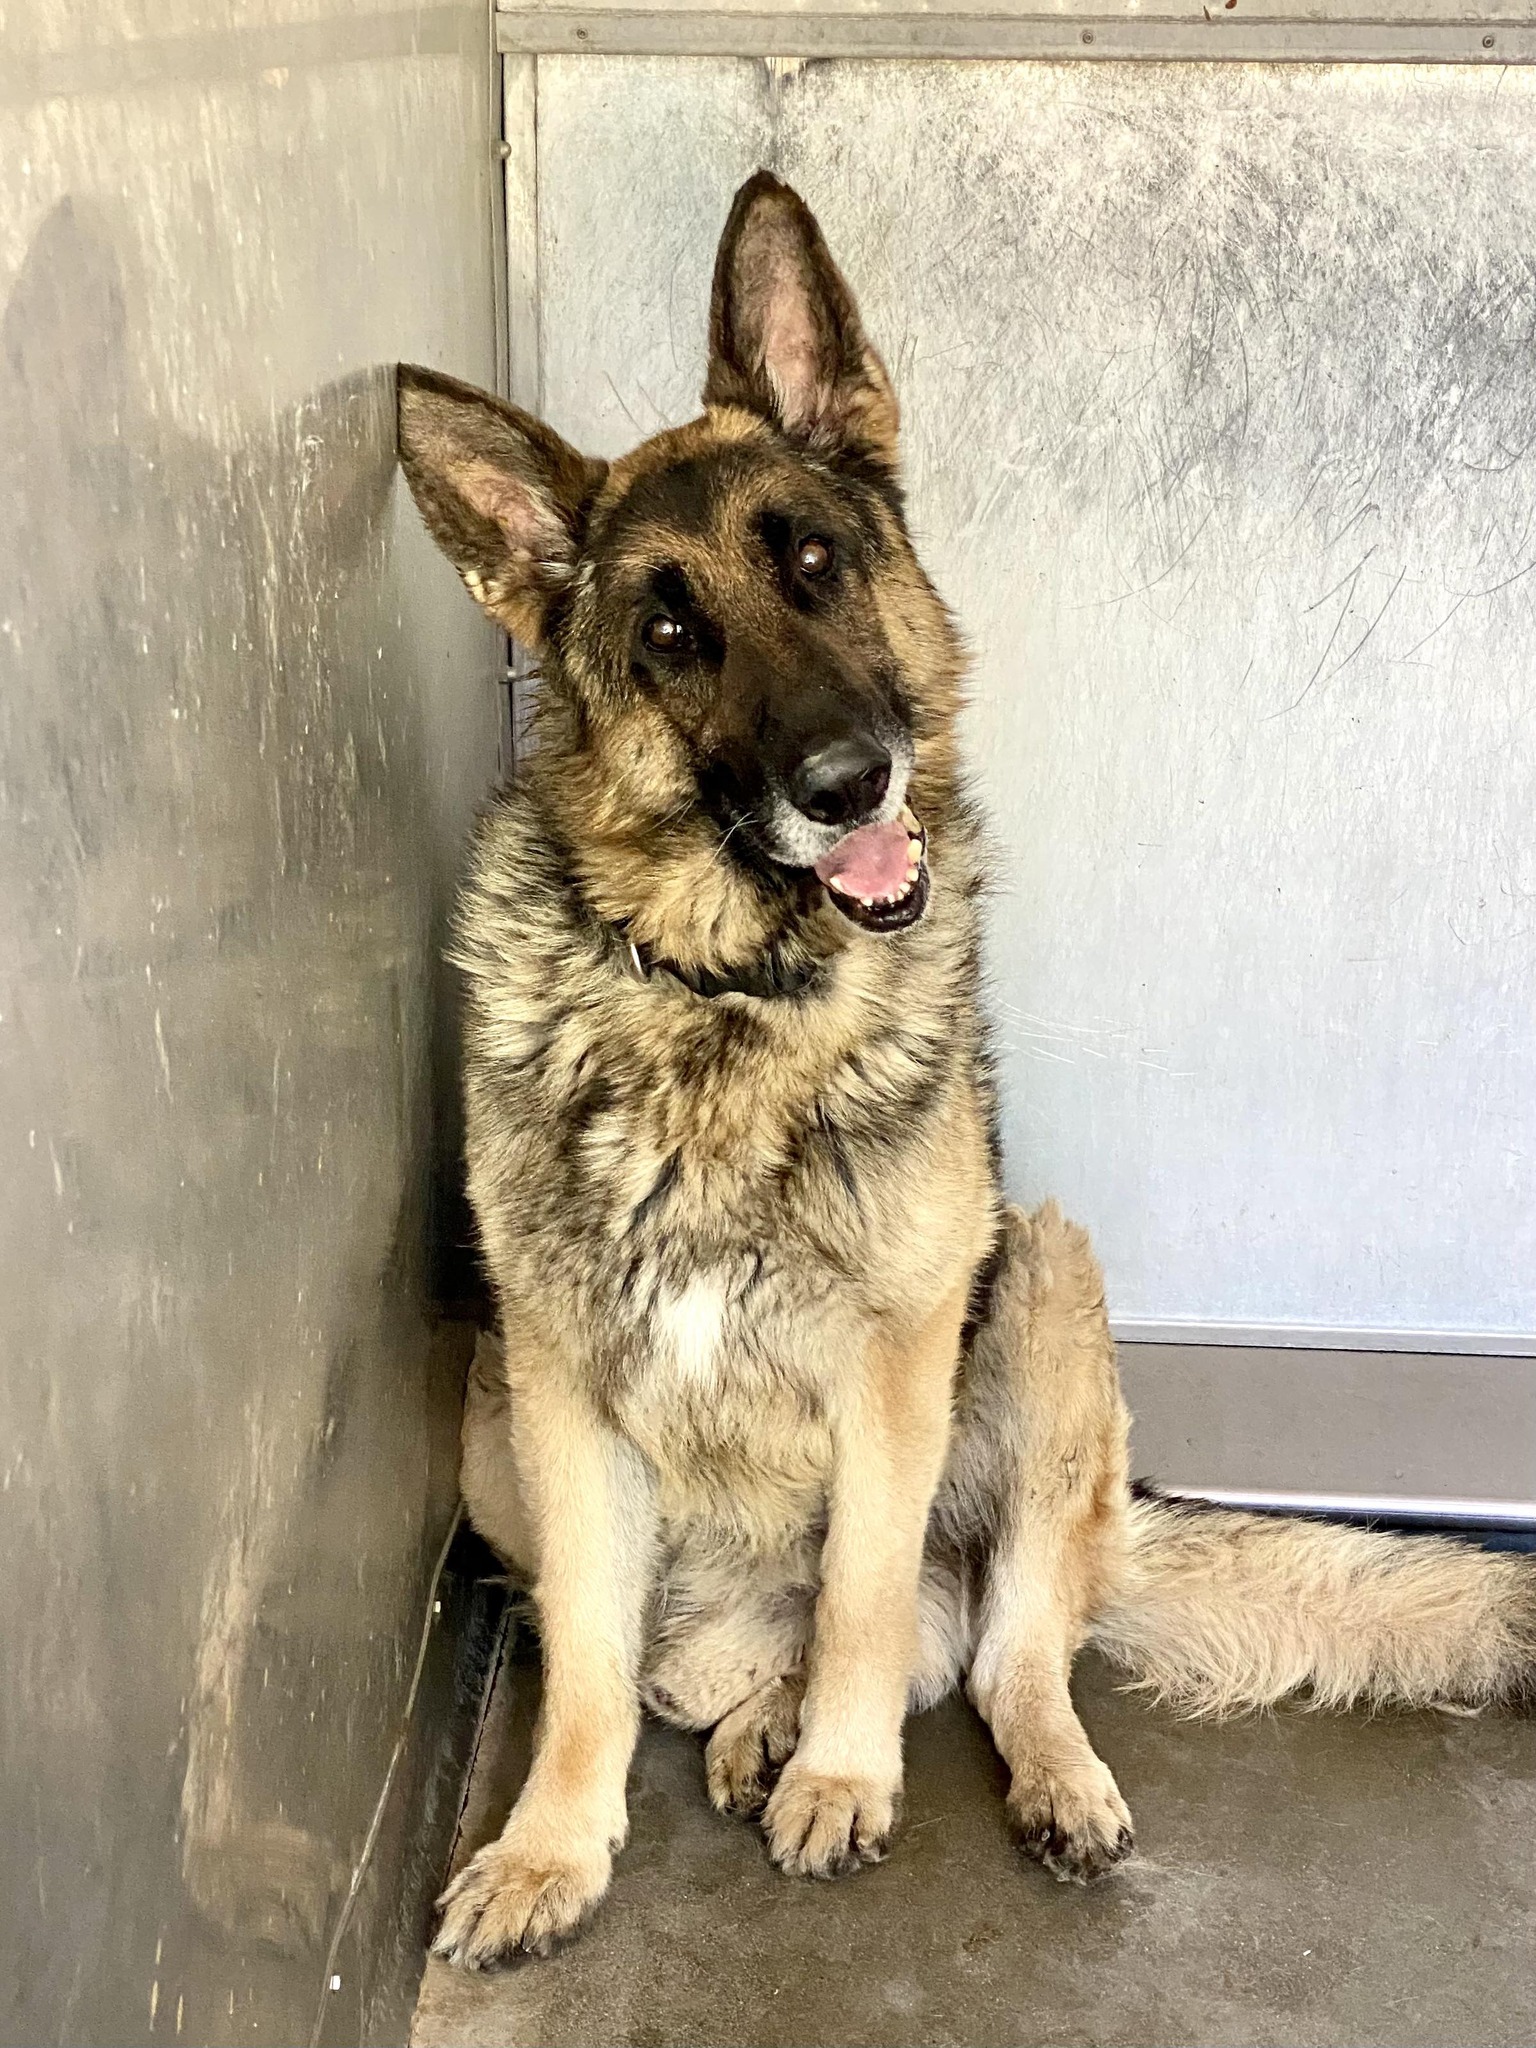 Handsome German shepherd on euthanasia list for being old